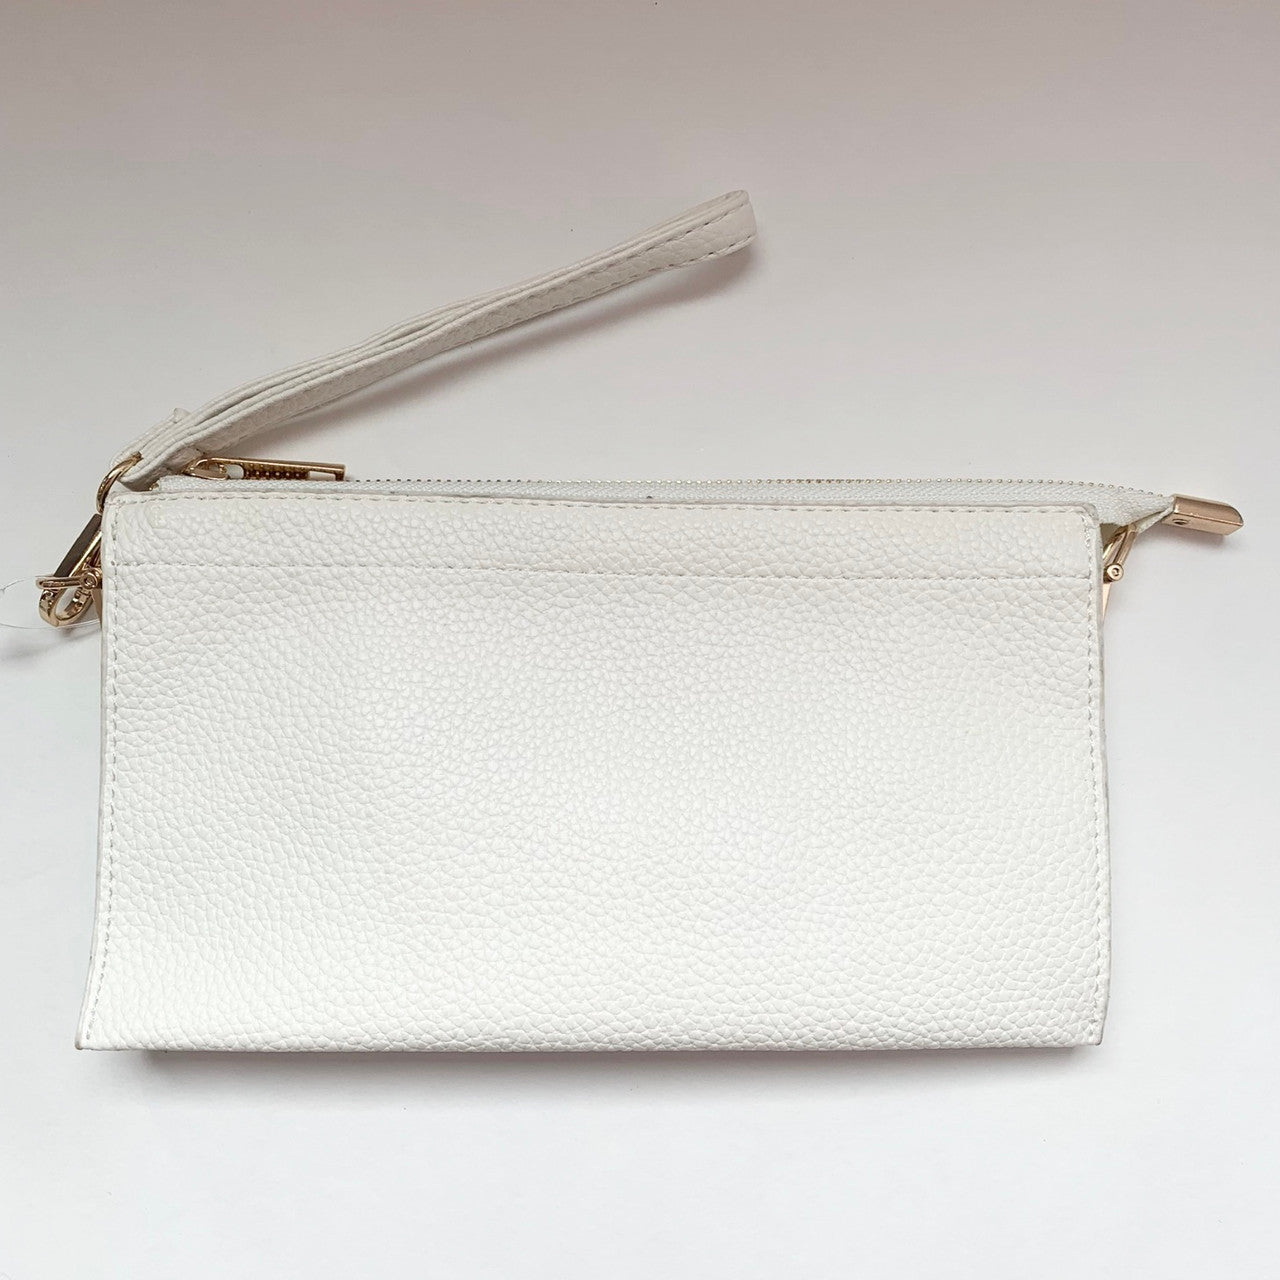 Perfect 3 Pocket Clutch White